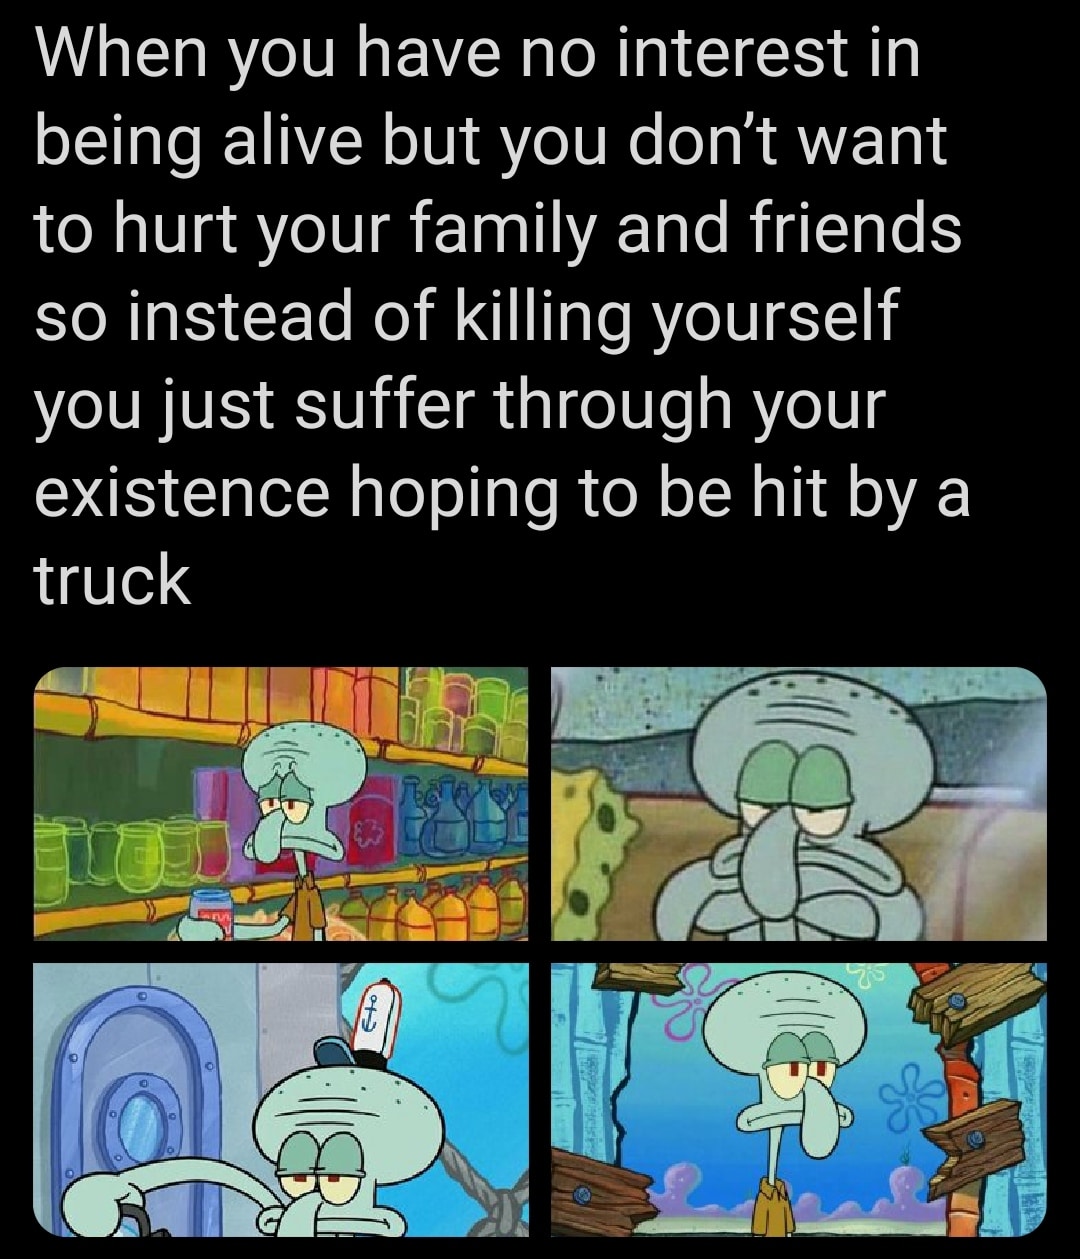 Depression,  depression memes Depression,  text: When you have no interest in being alive but you don't want to hurt your family and friends so instead of killing yourself you just suffer through your existence hoping to be hit by a truck 